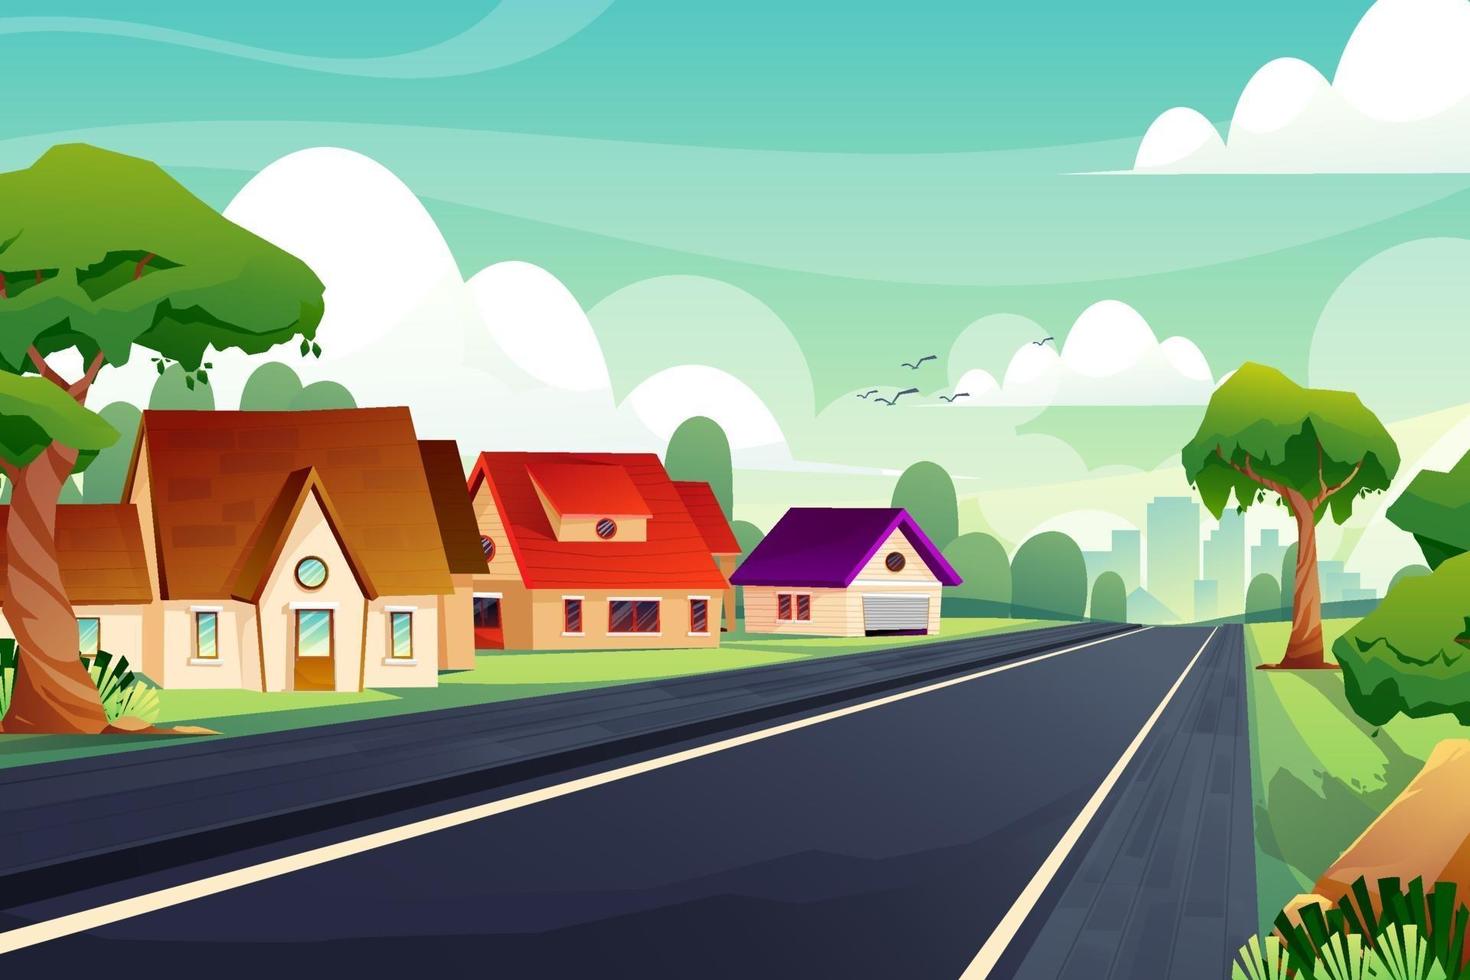 Rural scene Beautiful nature landscape with houses and road vector